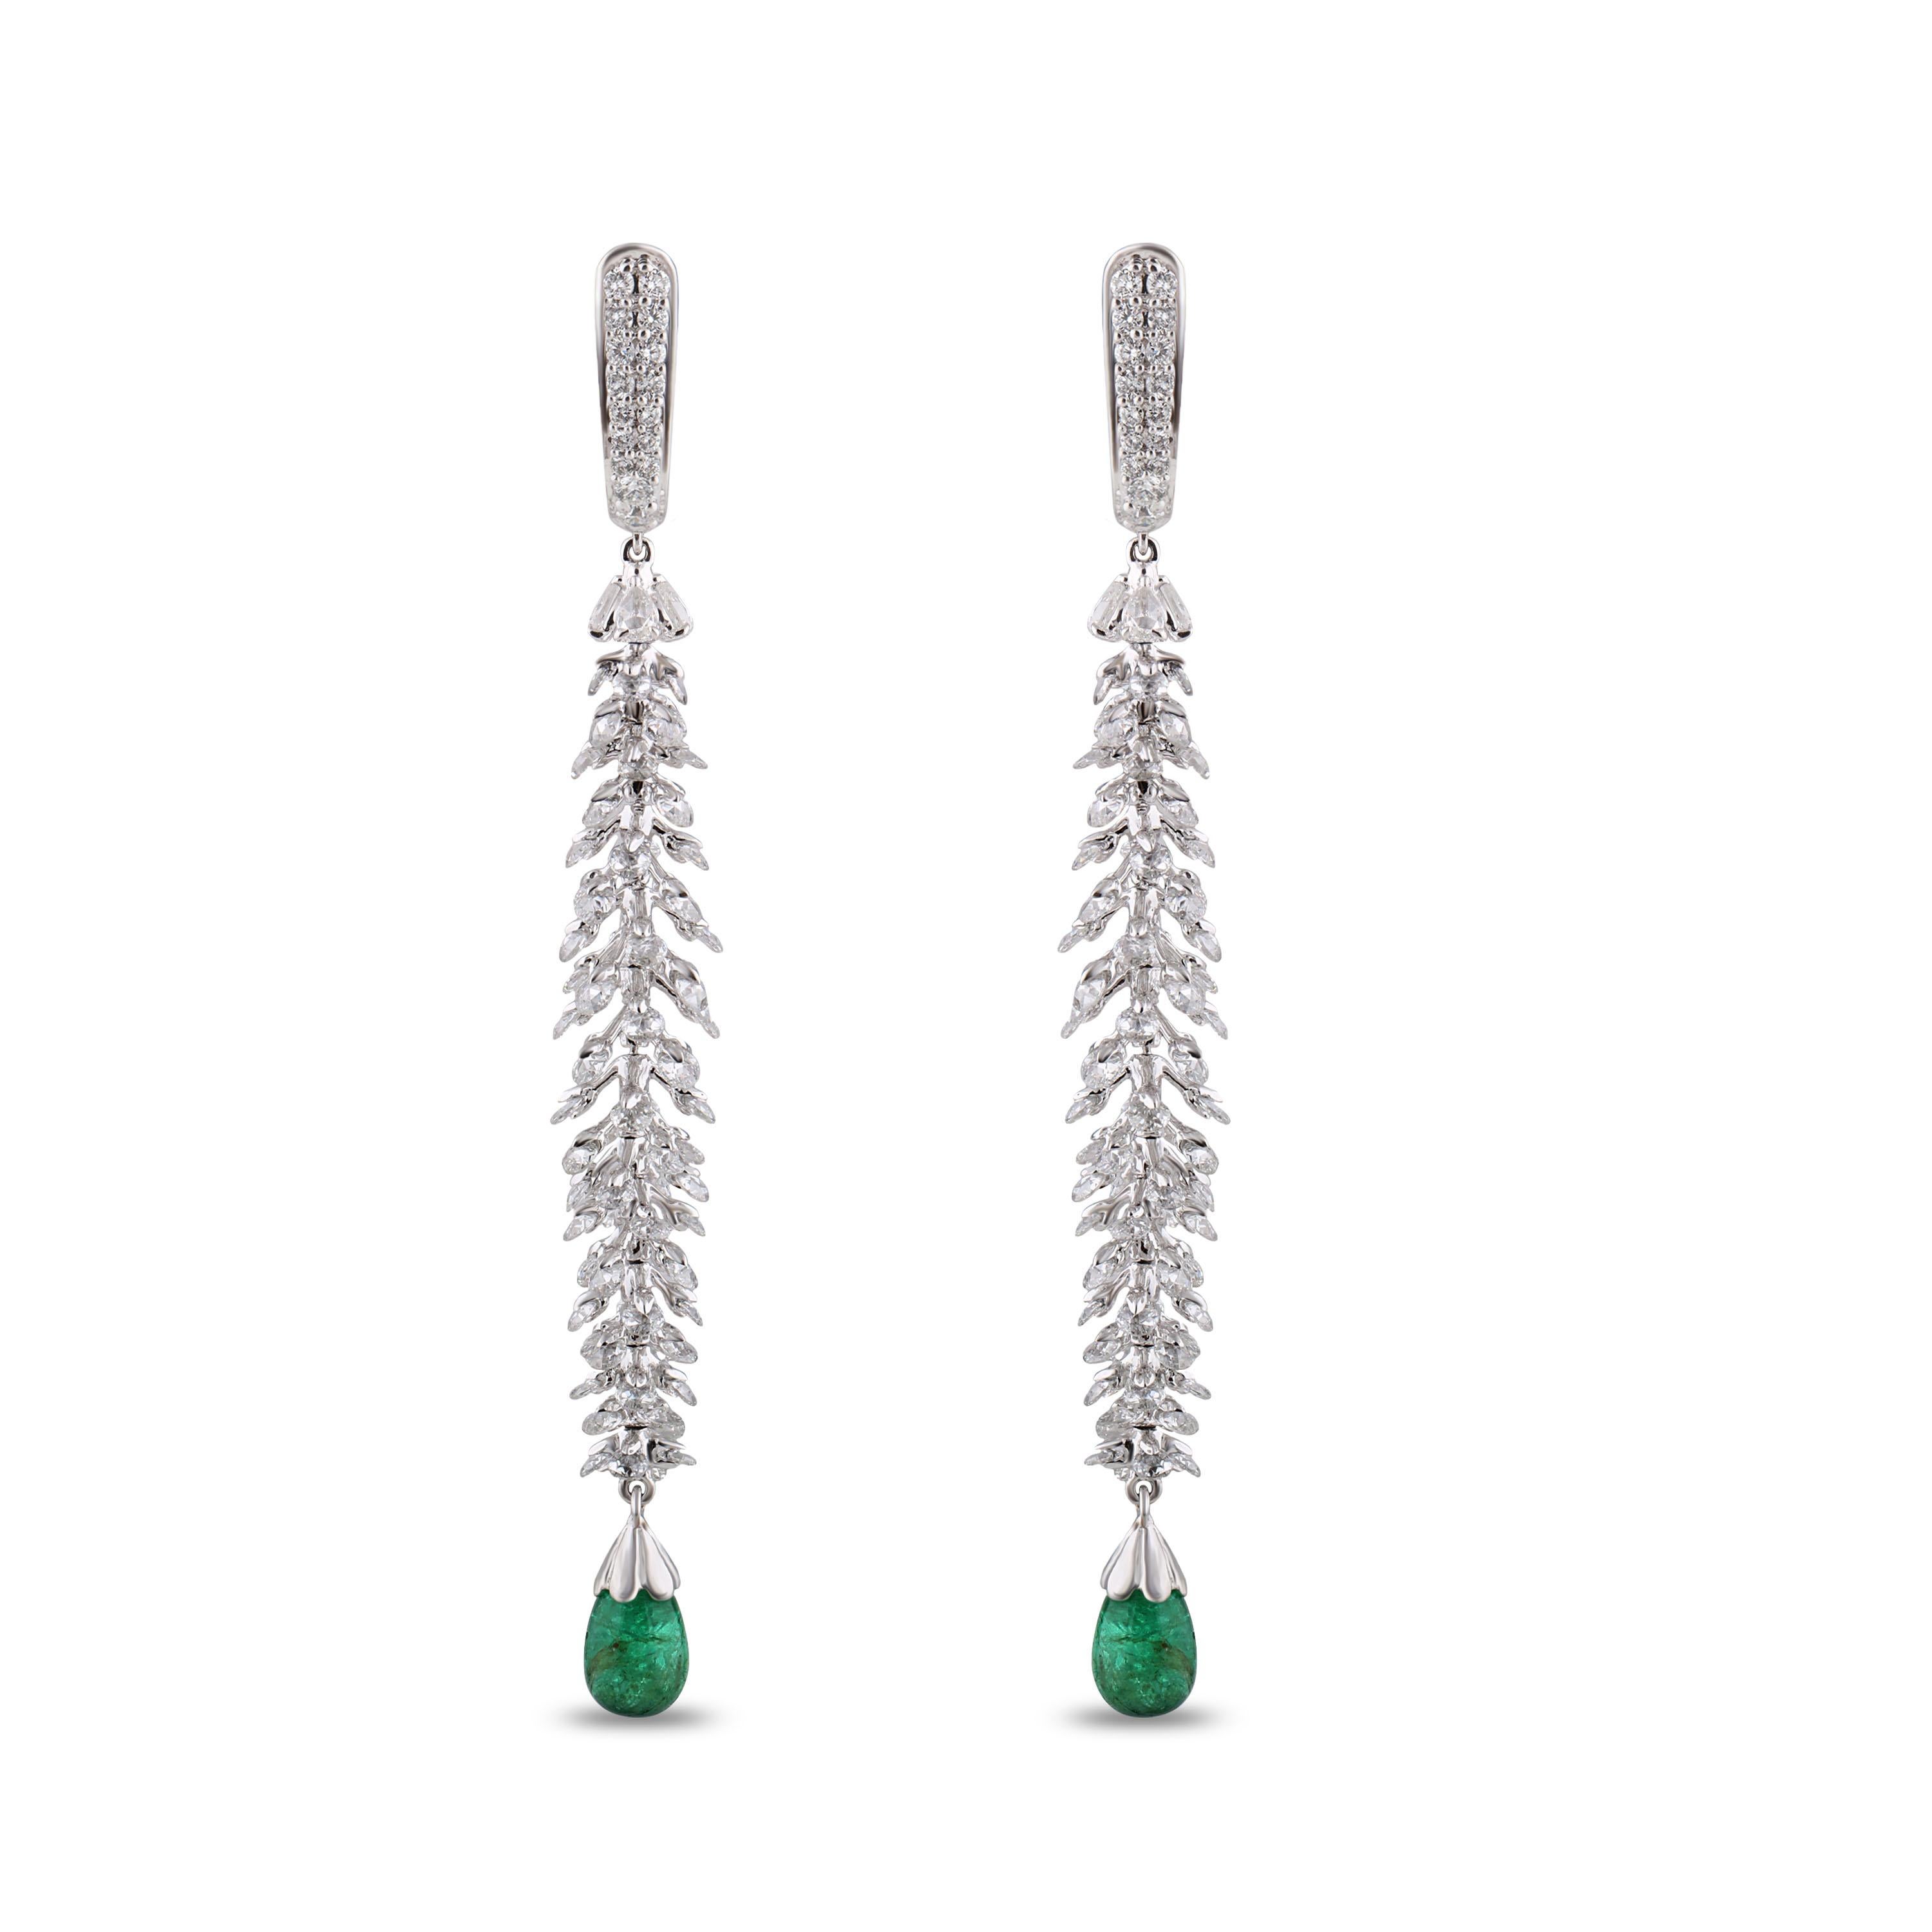 Studio Rêves Rose Cut Dangling Earrings with Emeralds in 18 Karat Gold In New Condition For Sale In Mumbai, Maharashtra